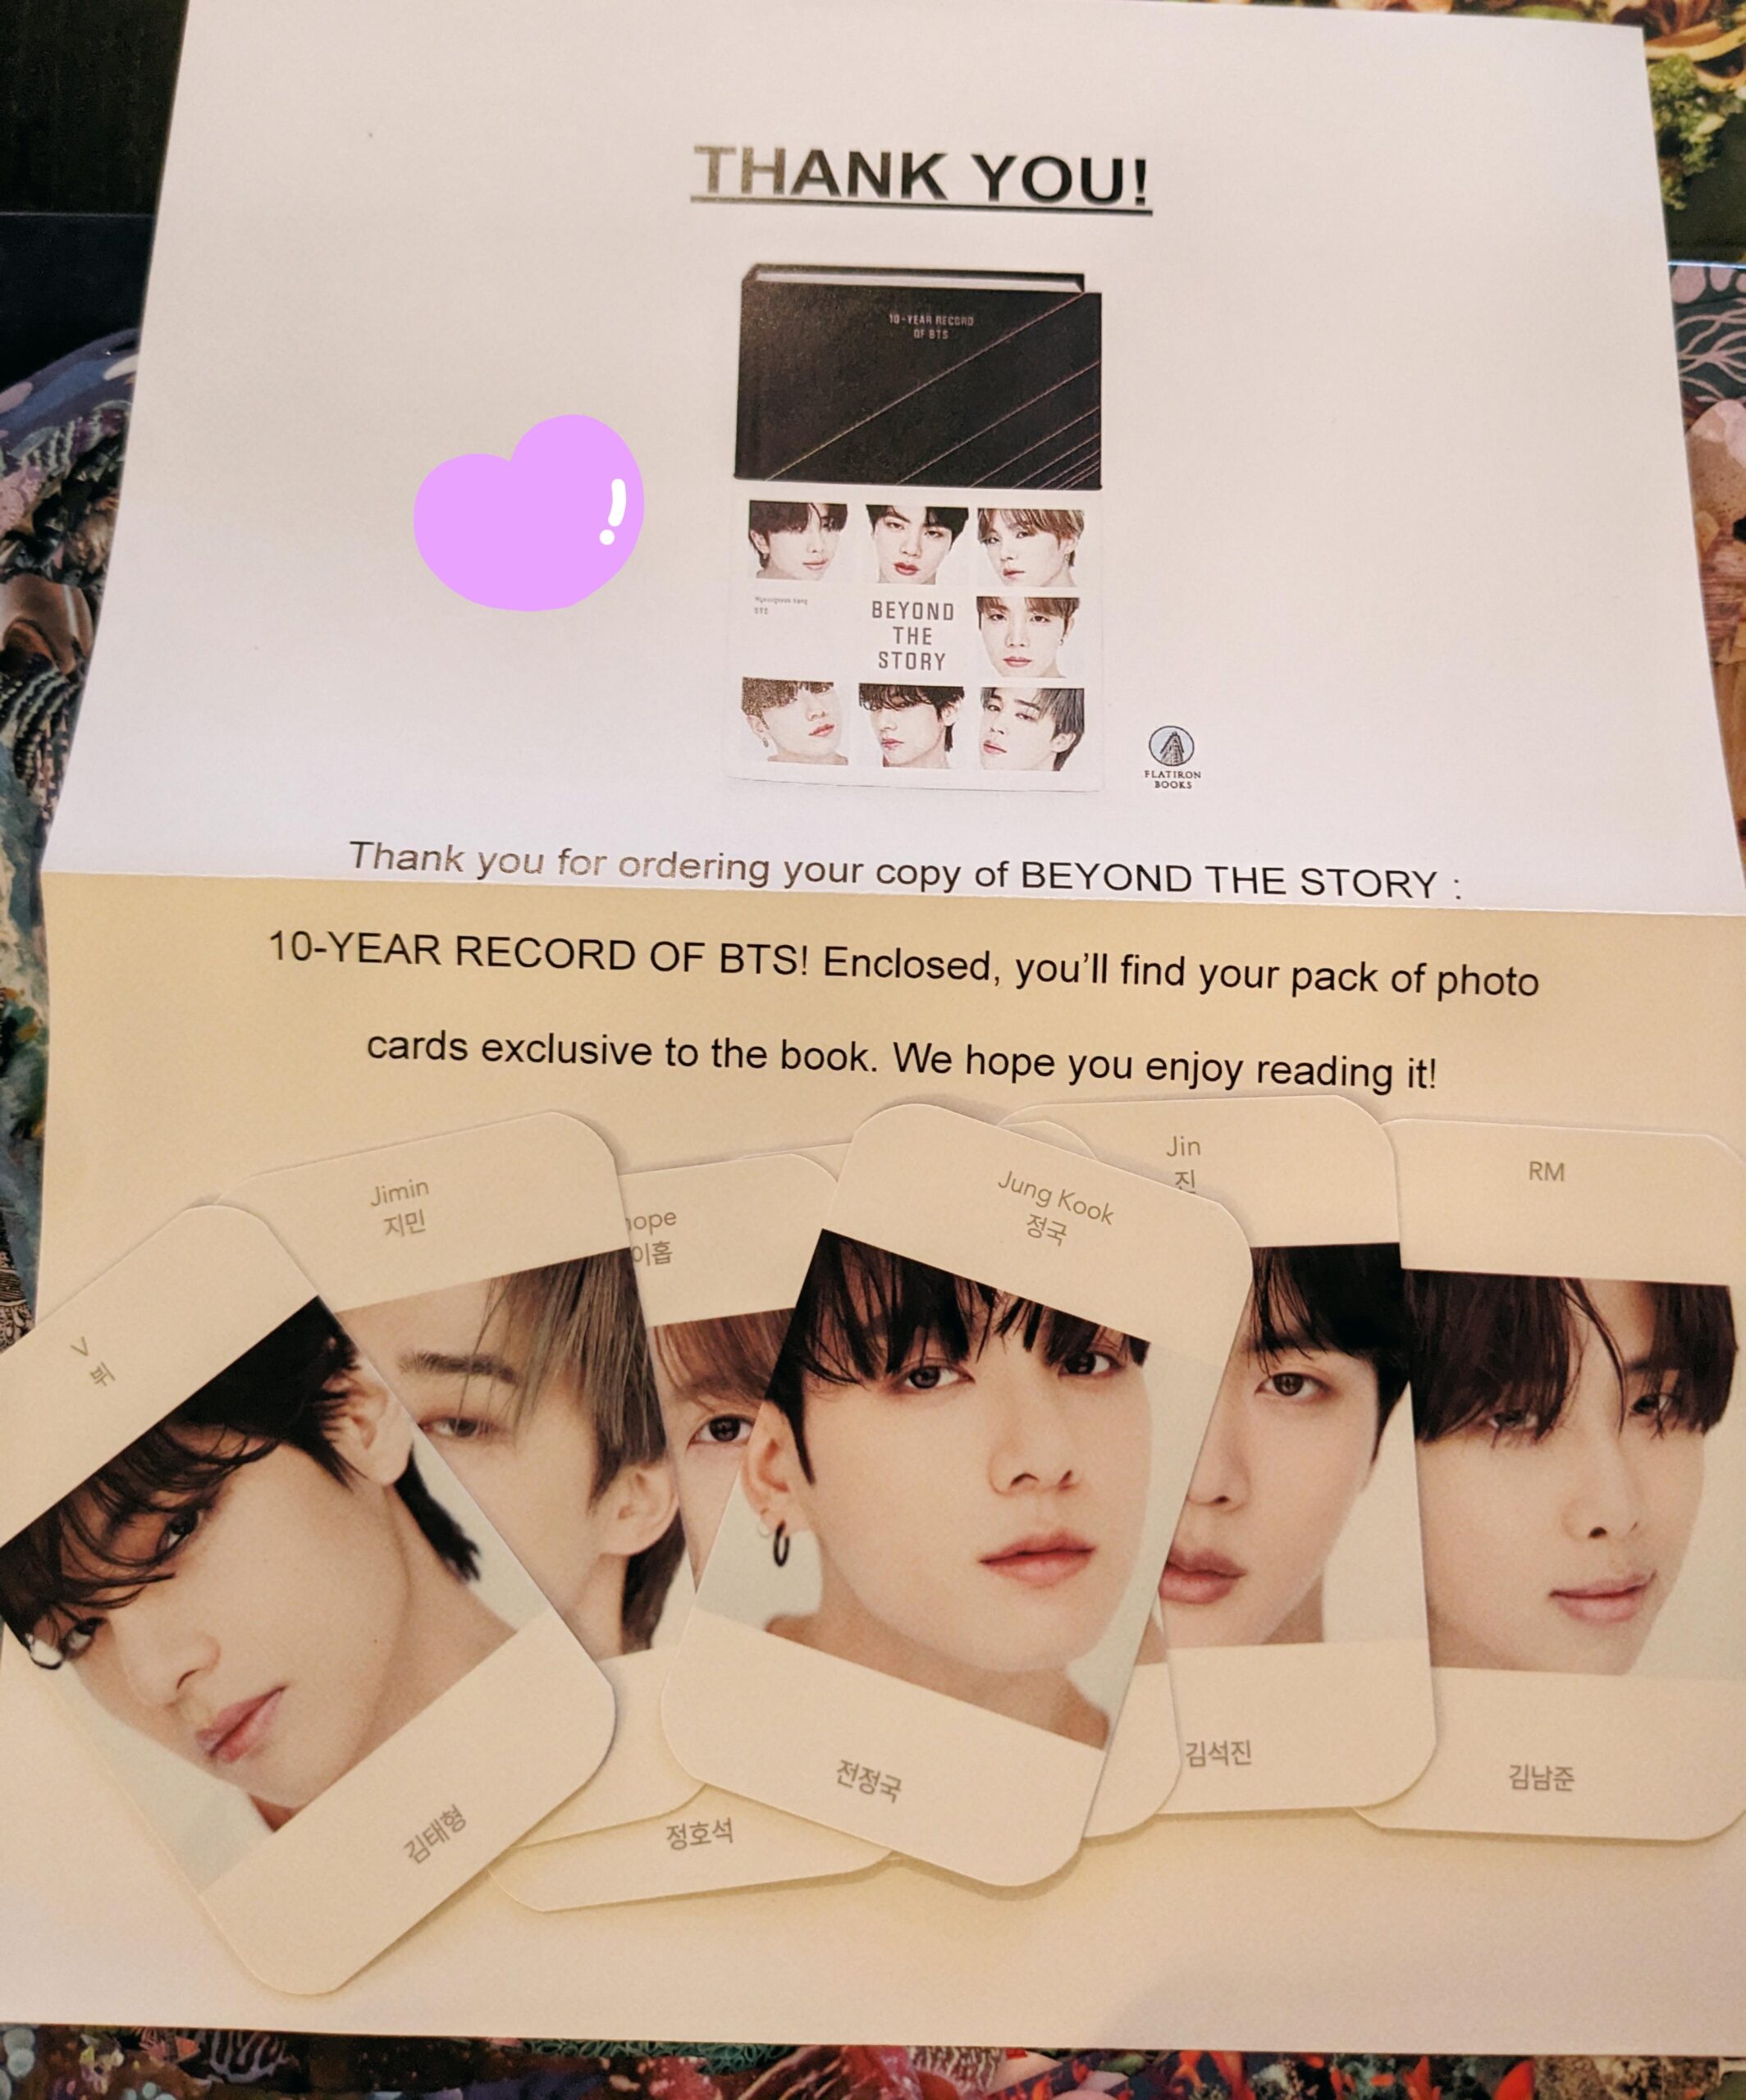 Anyone else get lucky and receive one of the 500 sets of Beyond The Story Photocards? 😭